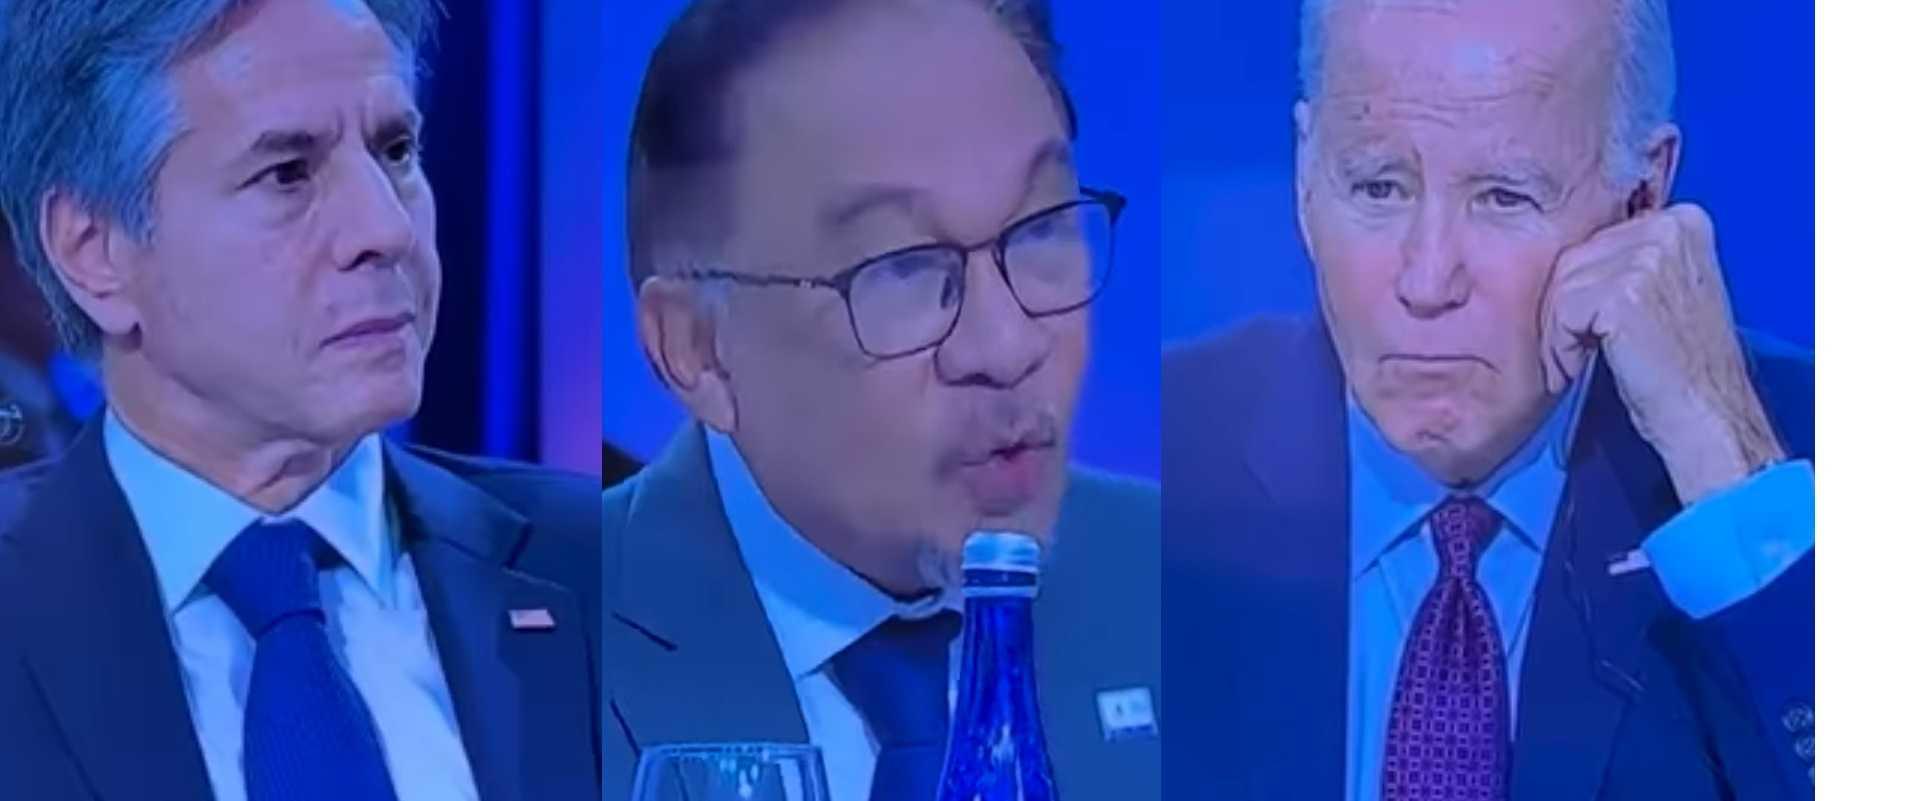 Screenshots from a video clip showing Anwar Ibrahim speaking during a closed-door session attended by world leaders, including US President Joe Biden and State Secretary Anthony Blinken, during the recent Apec meeting in San Francisco.